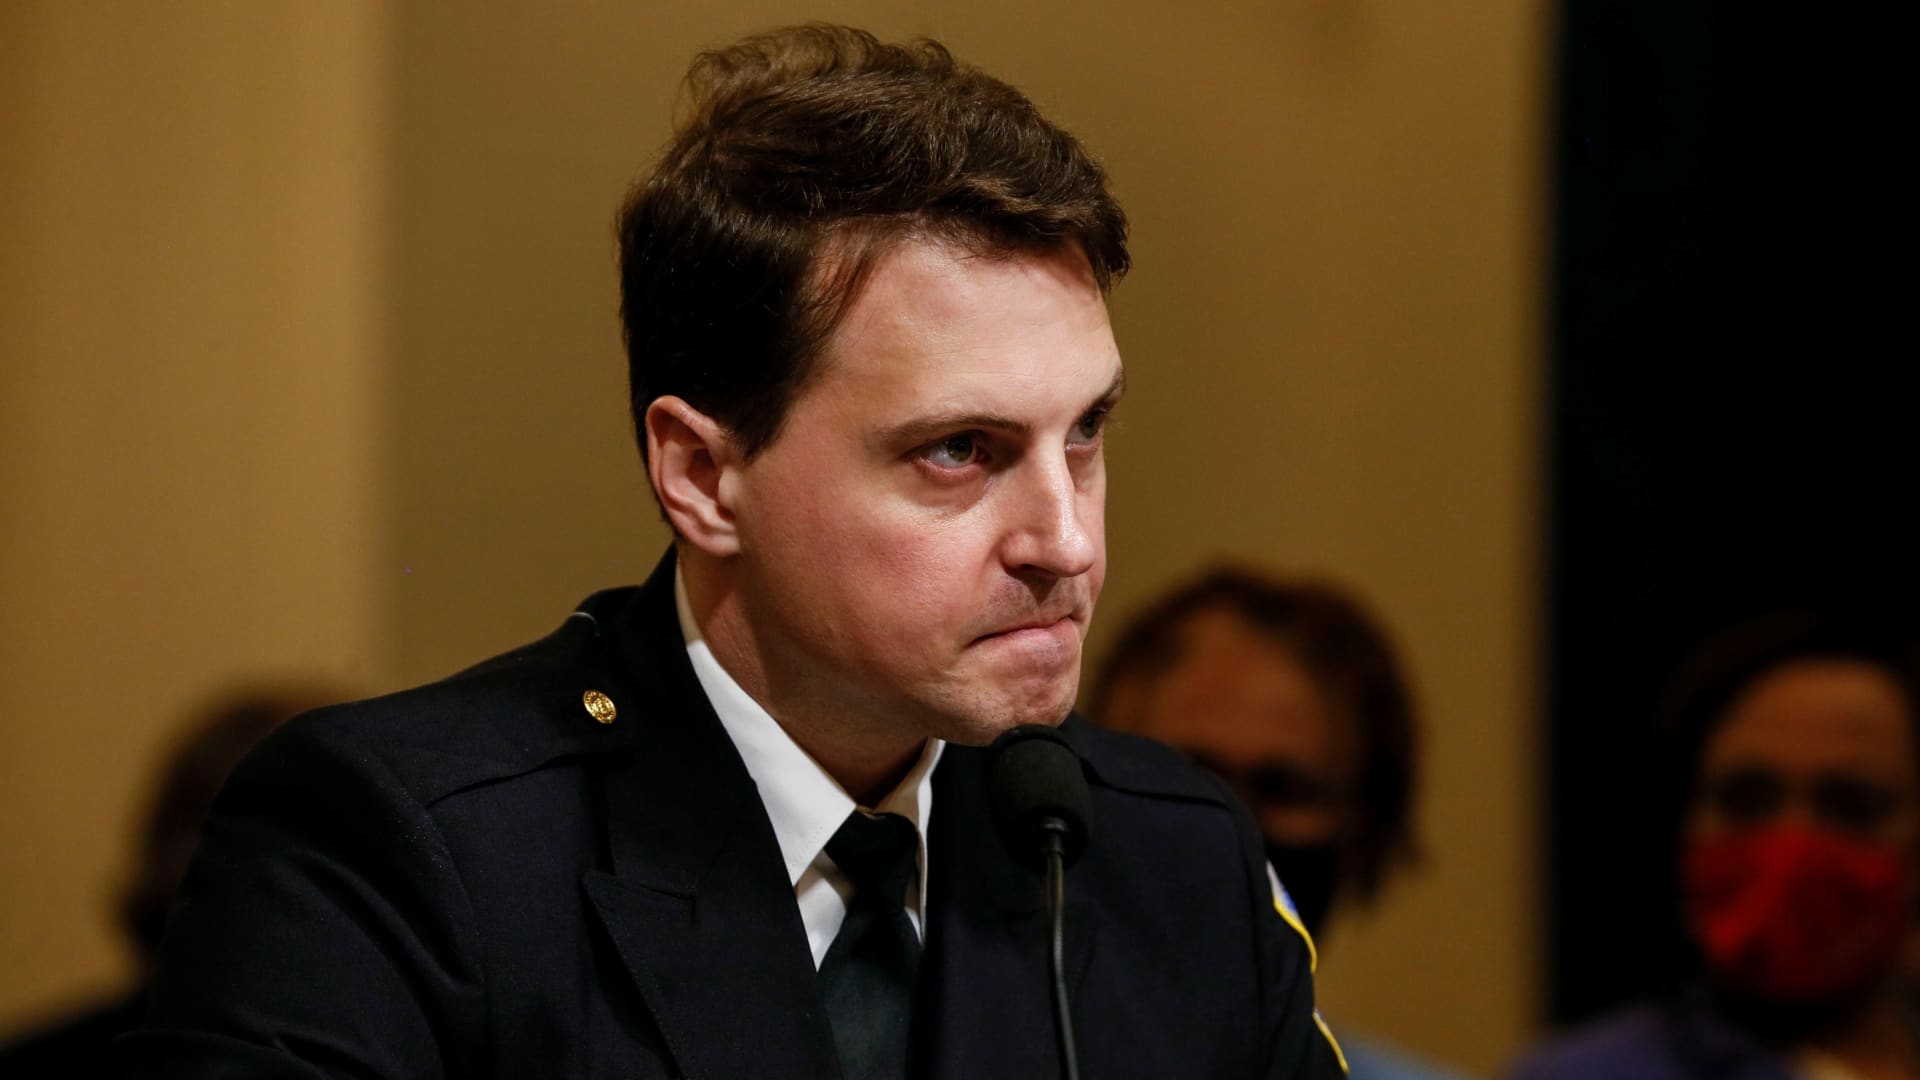 Metropolitan Police Department Officer Daniel Hodges testifies during the opening hearing of the U.S. House (Select) Committee investigating the January 6 attack on the U.S. Capitol, on Capitol Hill in Washington, U.S., July 27, 2021.